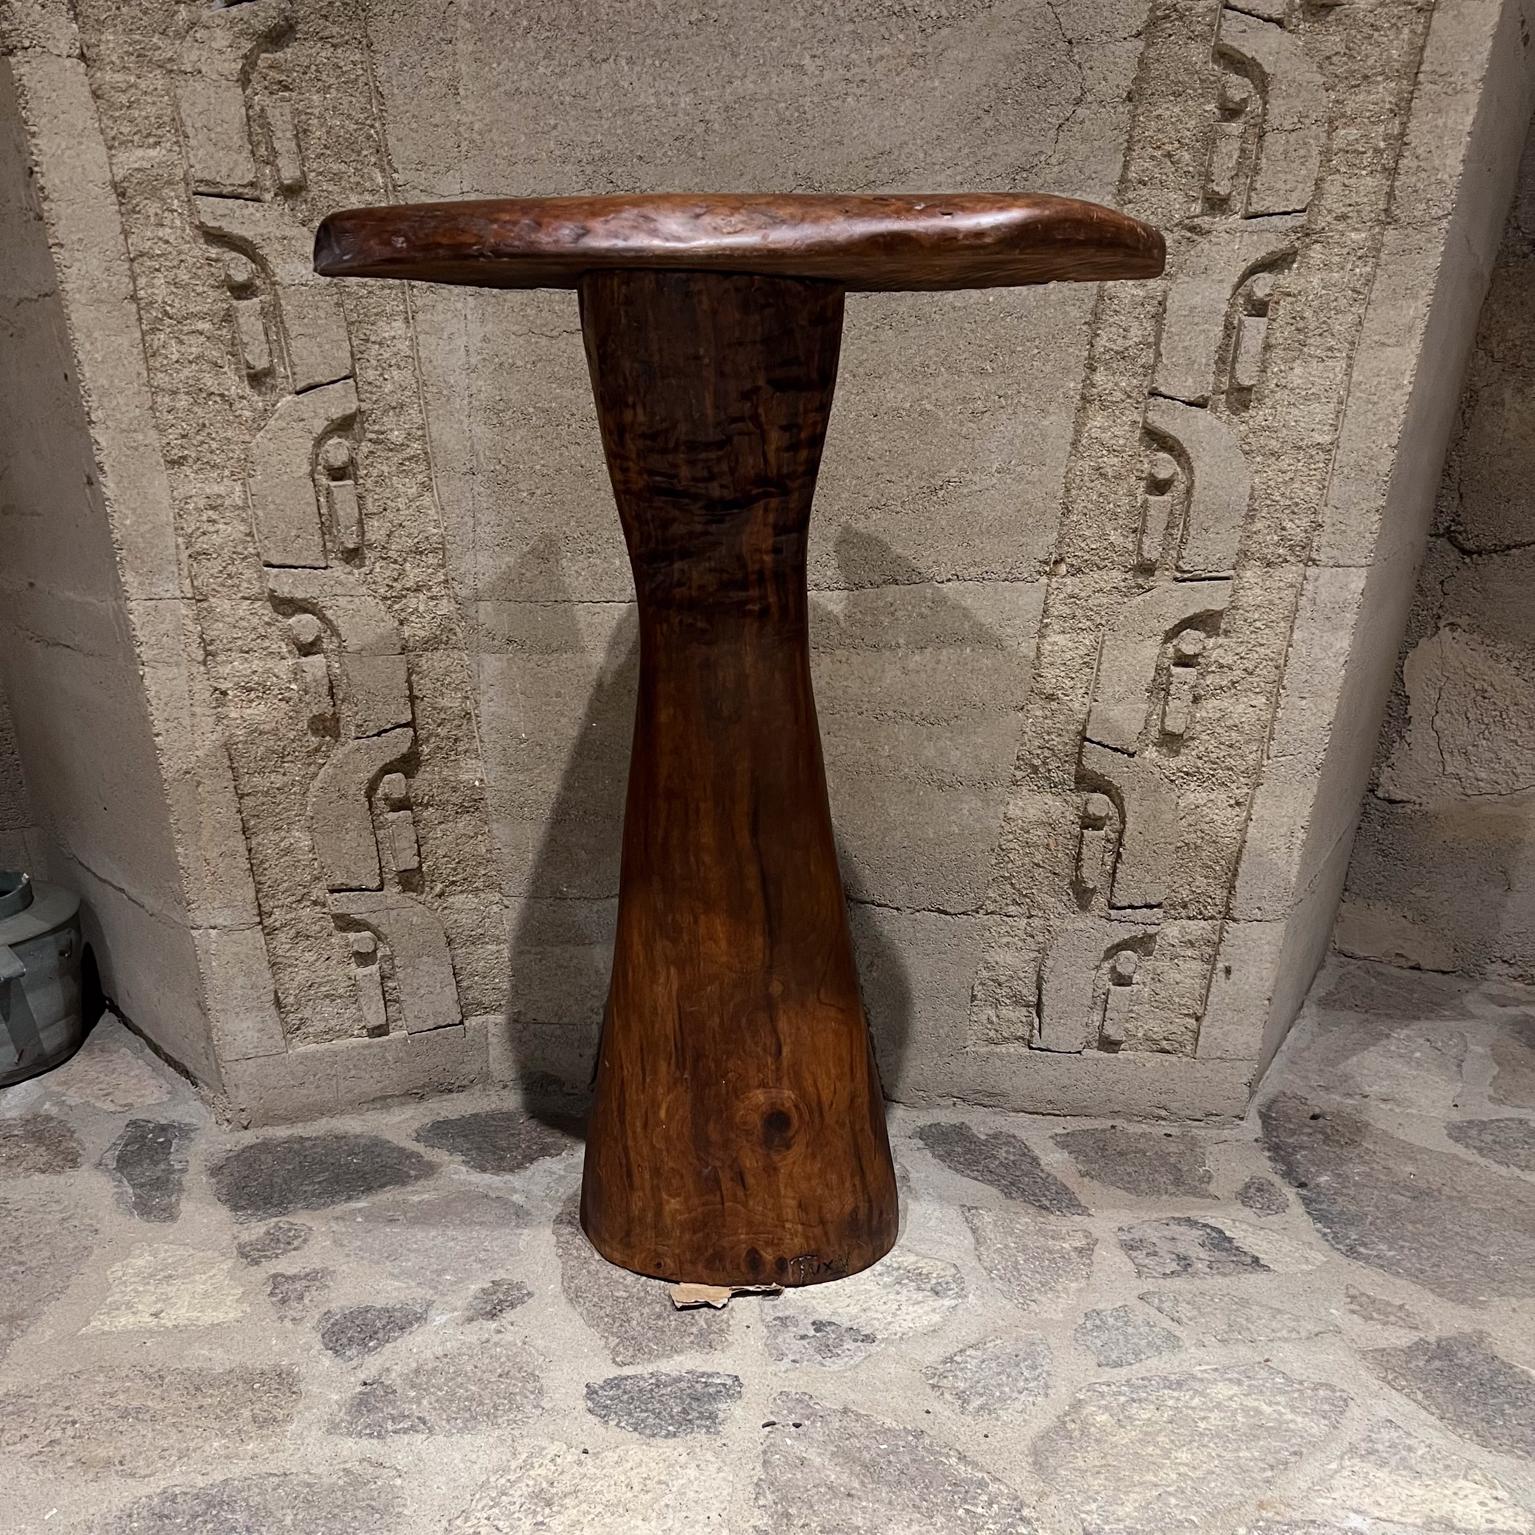 2013 Modern Studio Piece Solid Wood Live Edge Pedestal Table
Signed C W Tux Horn 2013 
39 h x 27 w x 17.5 d
Original Unrestored Preowned Vintage Condition.
See images provided.
Delivery to LA OC Palm Springs


